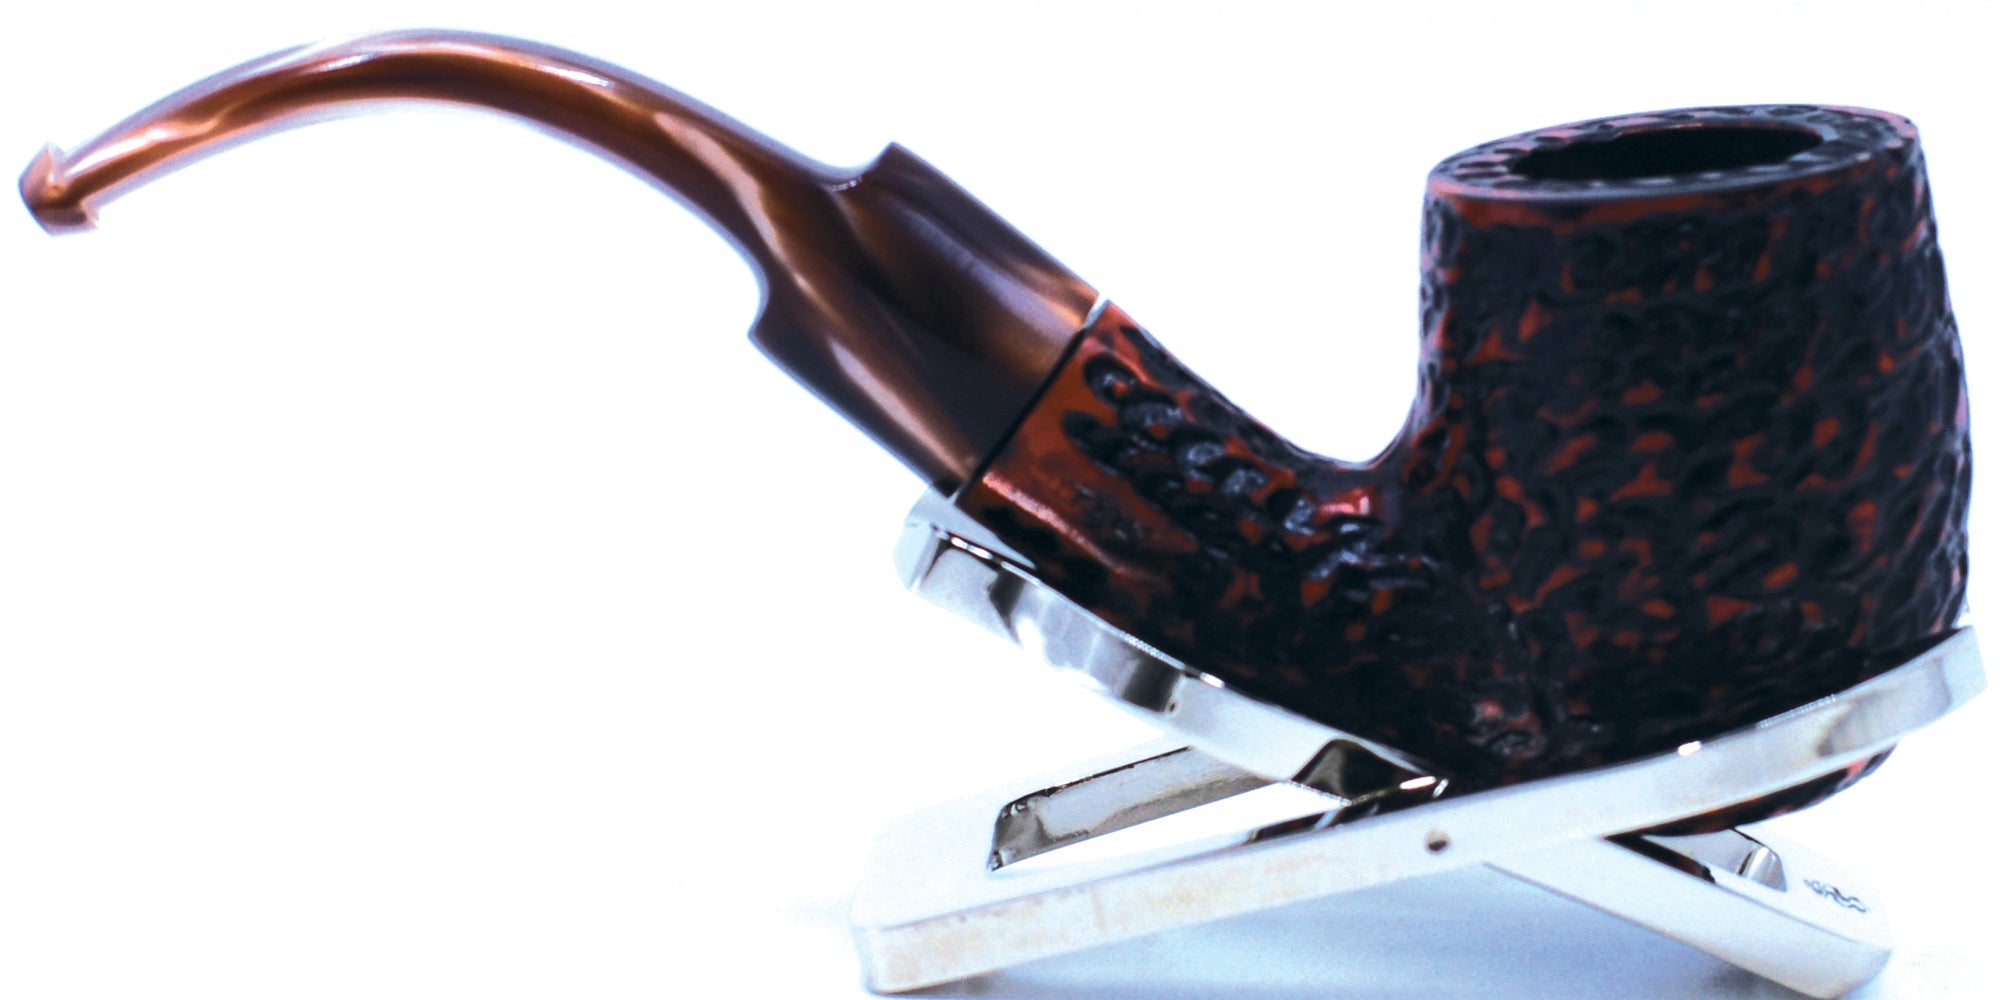 LEGENDEX® LASCALA* Plexiglass Mouthpiece 9 MM Filtered Briar Smoking Pipe Made In Italy 01-08-705